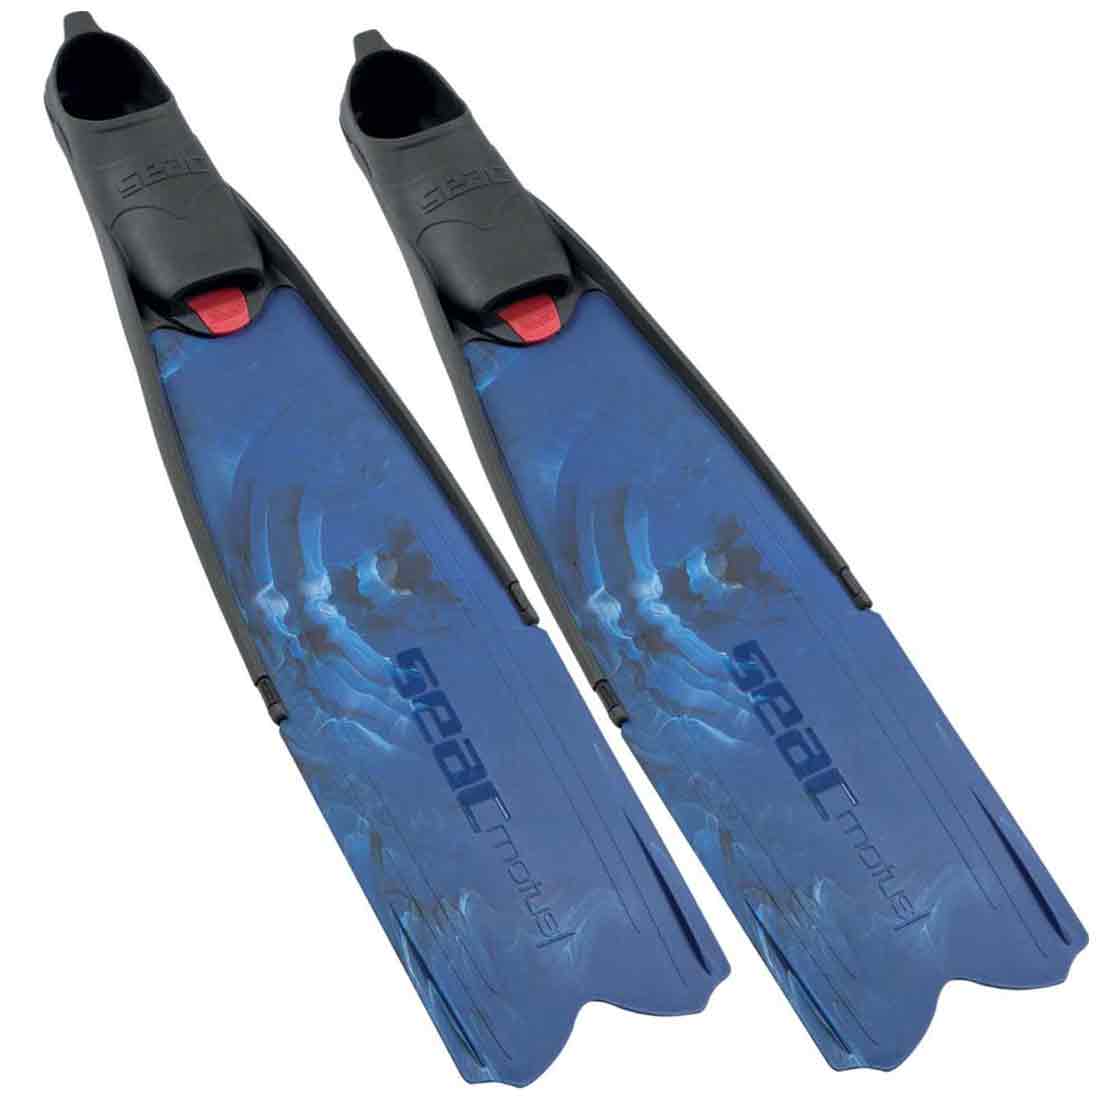 Spearfishing fins and accessories